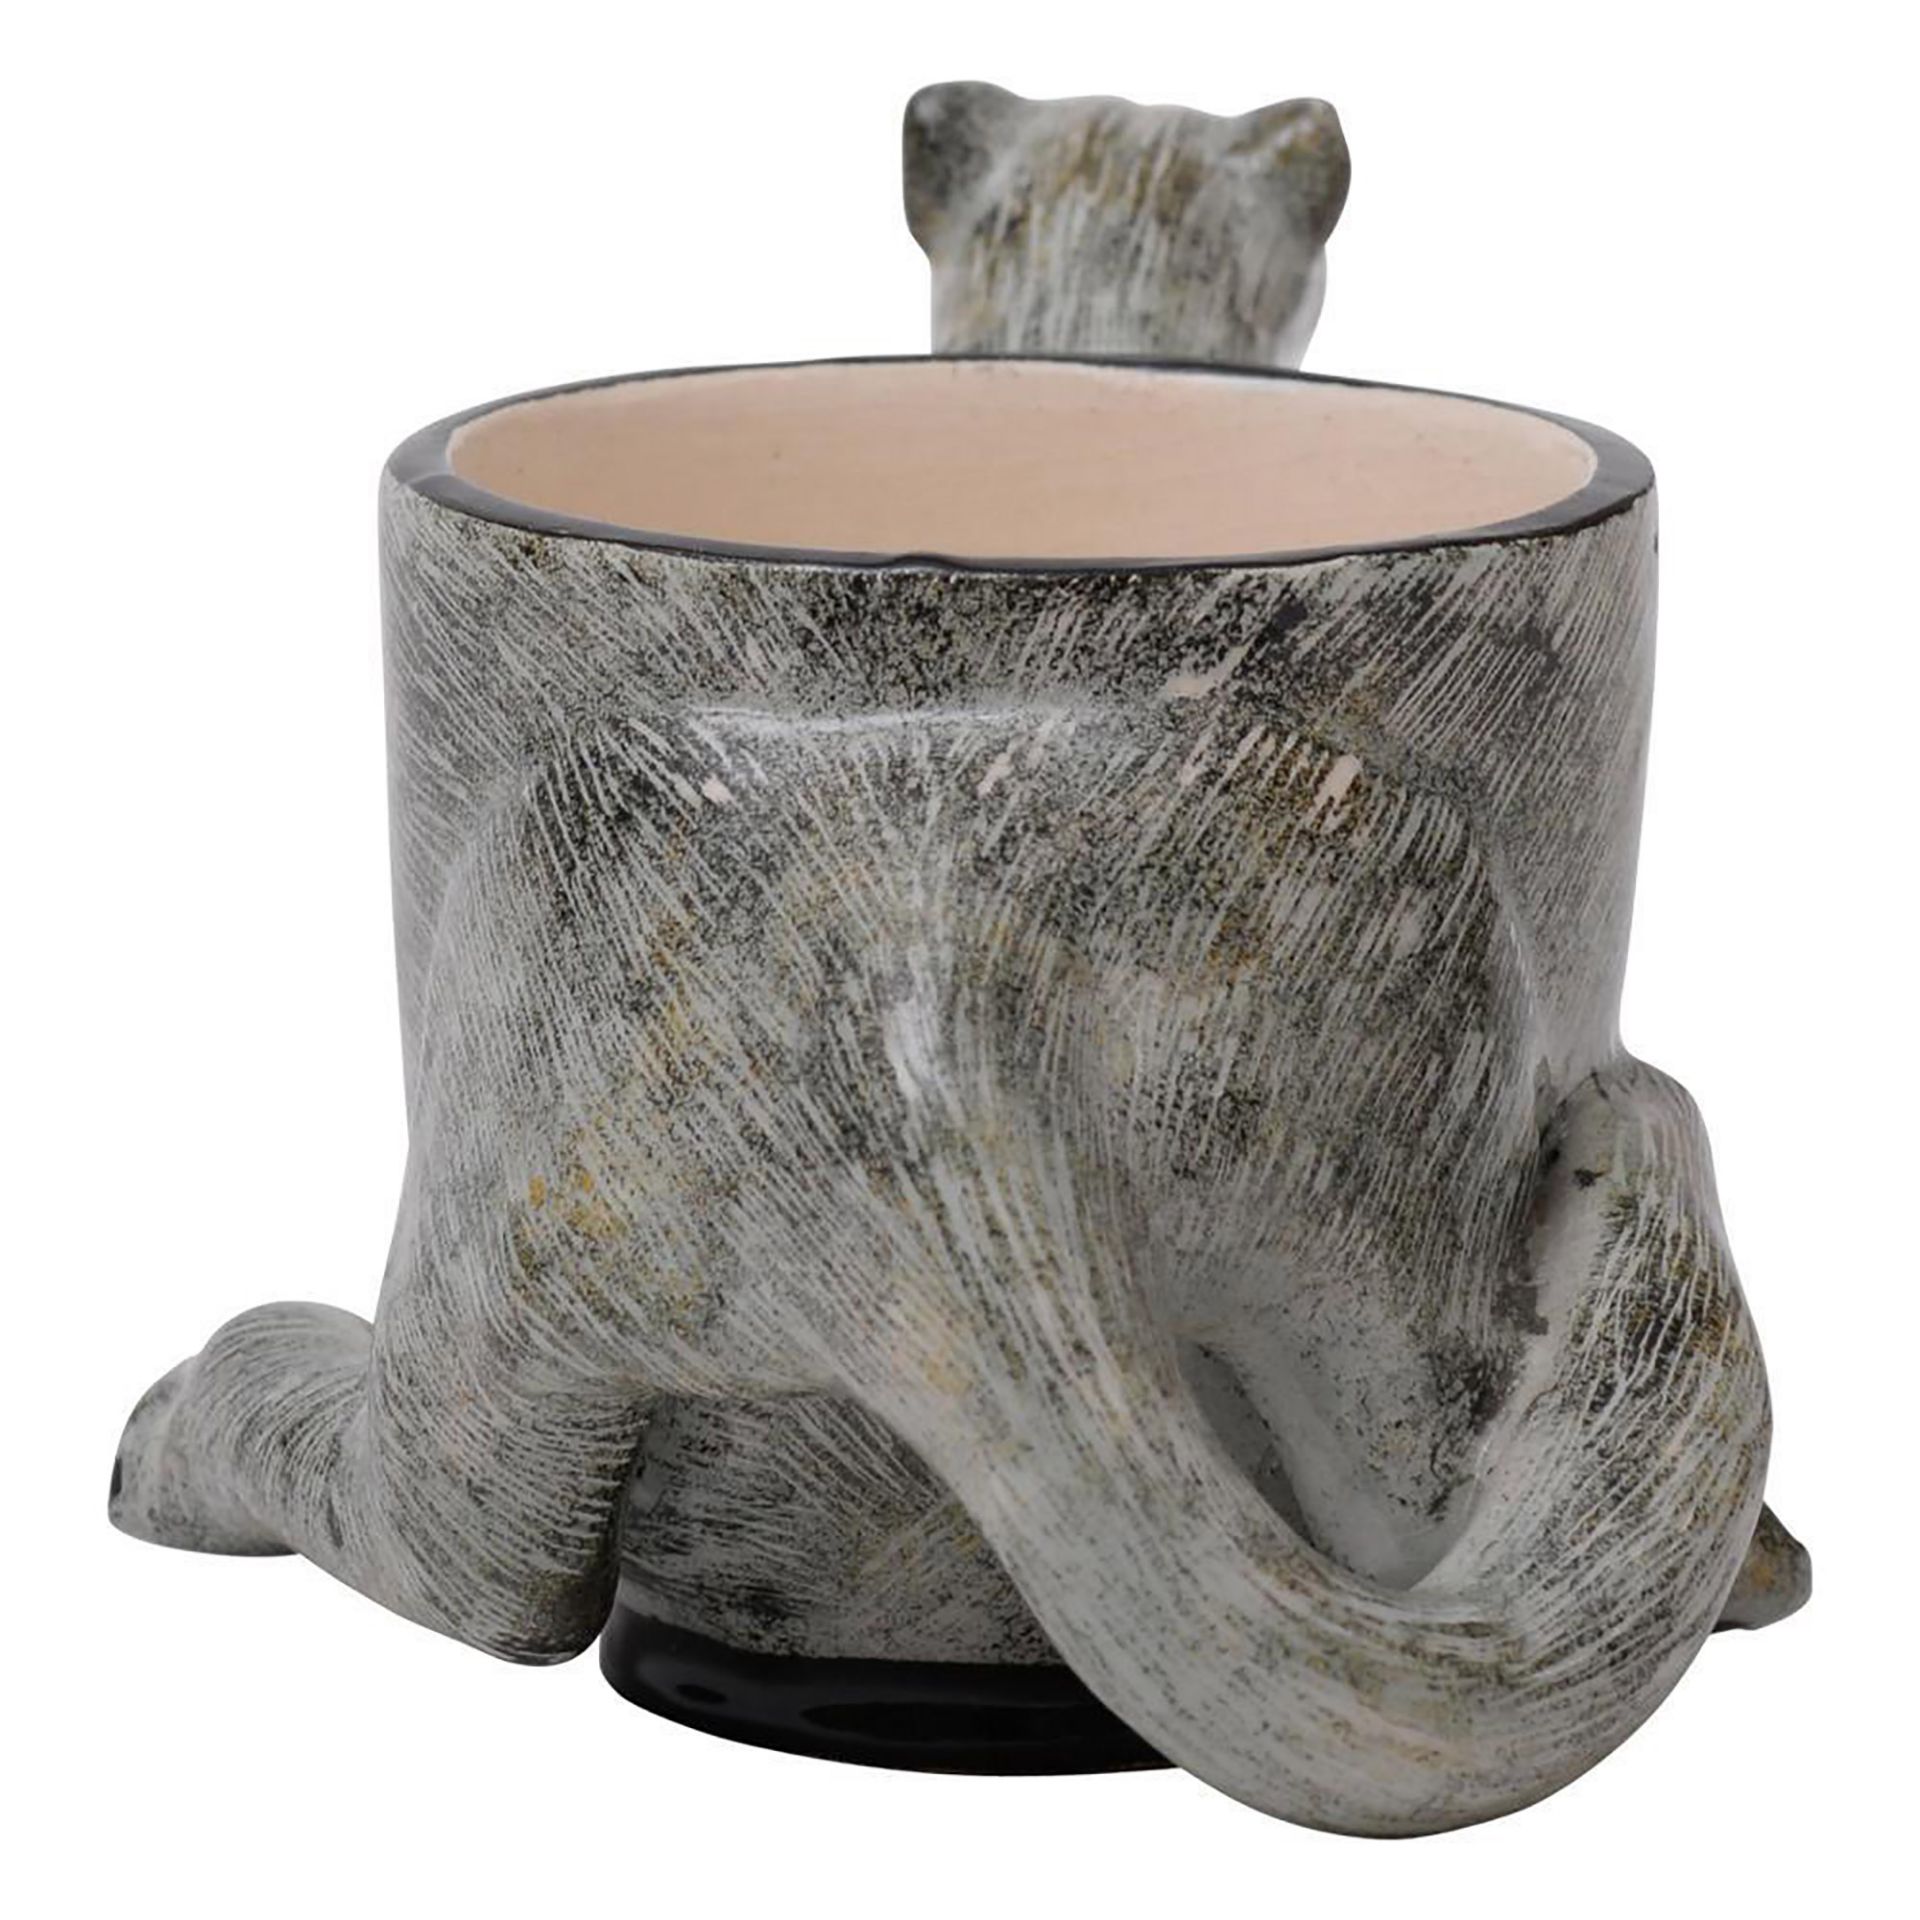 Mongoose Egg Cup by Ardmore Ceramics - Image 3 of 4